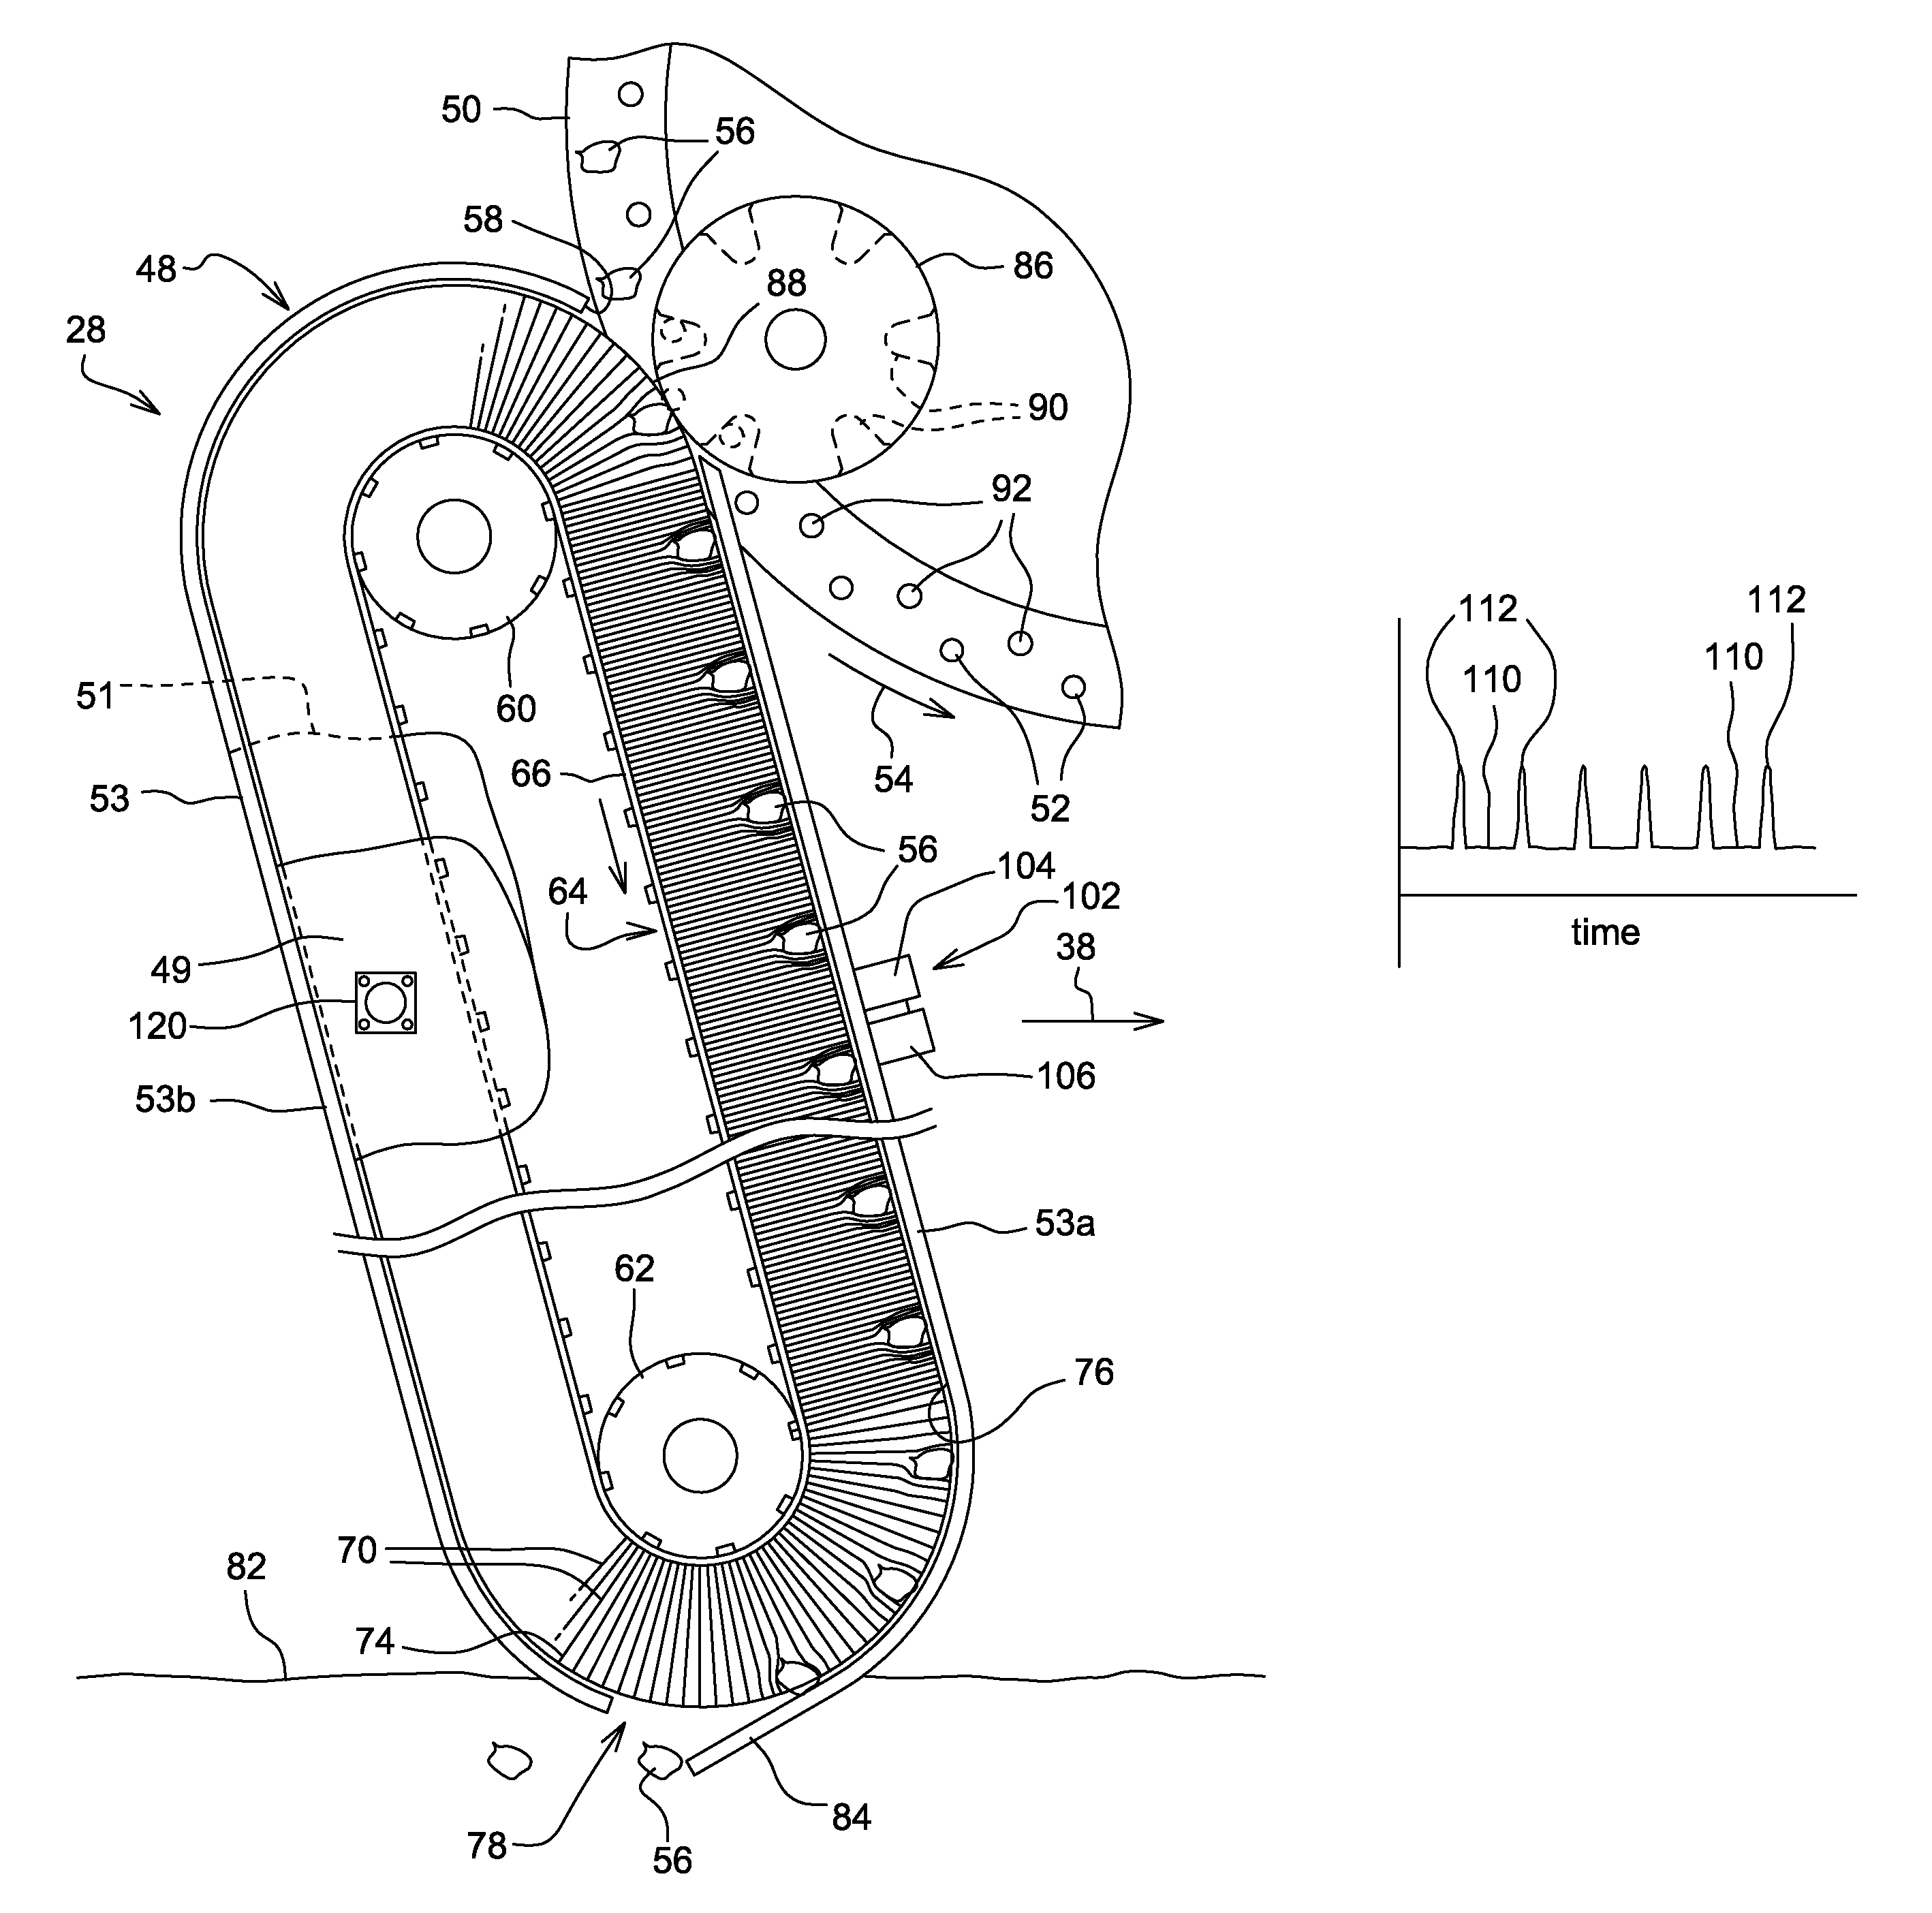 Seed delivery apparatus with sensor and moving member to capture and move seed to a lower outlet opening